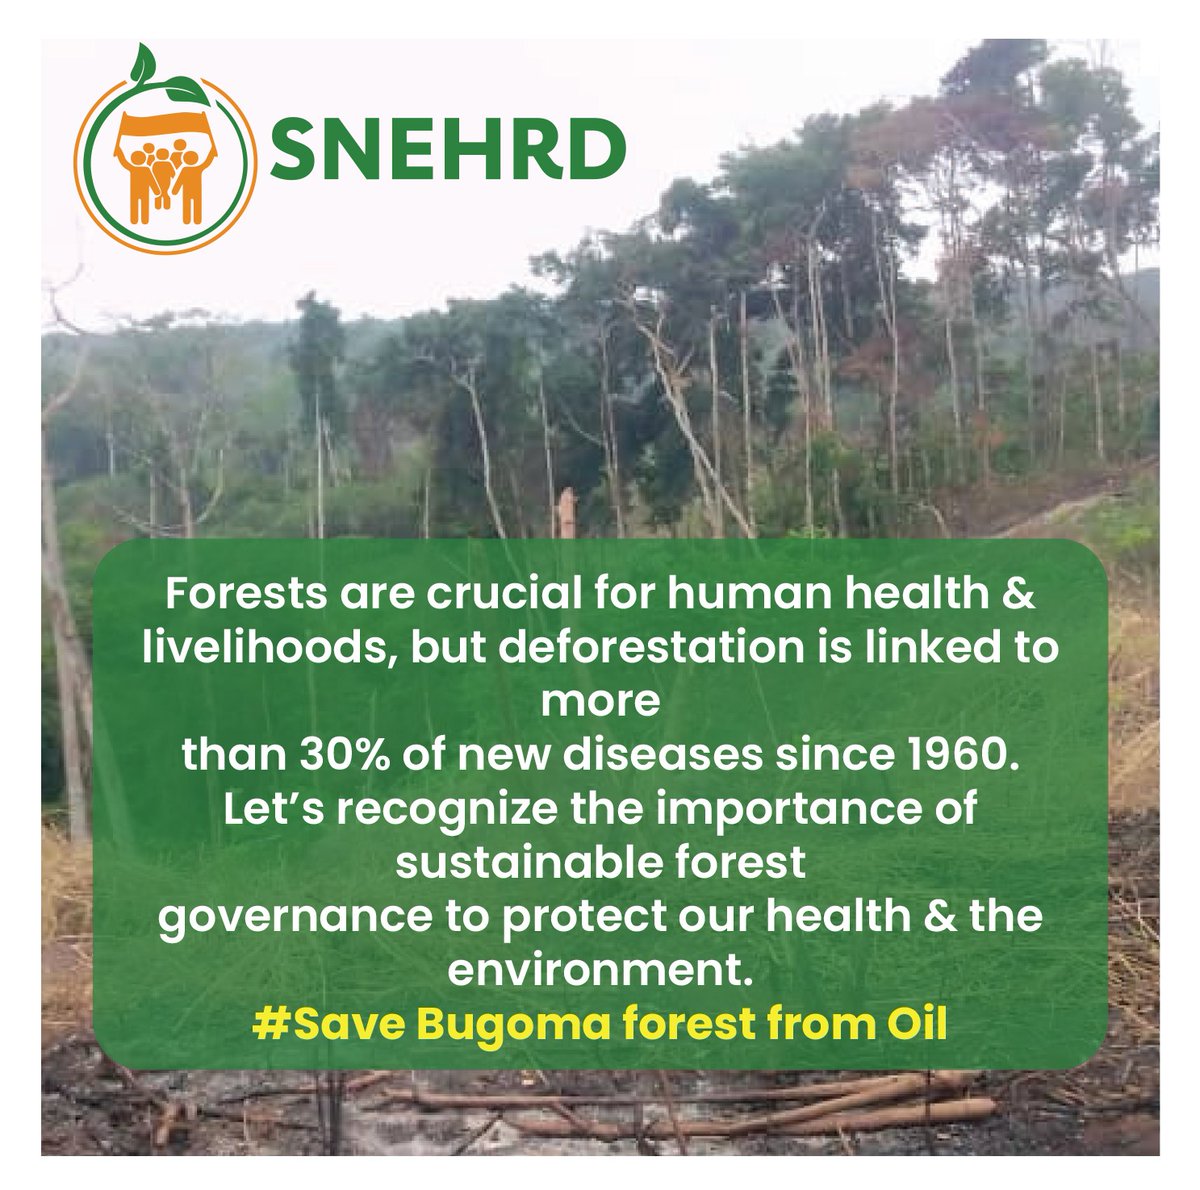 Forests are crucial for human health & livelihoods, but deforestation has been linked to more than 30% of new diseases since 1960. let's recognize the importance of sustainable forest governance to protect our health & the environment. 
# Save Bugoma forest from Oil and sugarcane